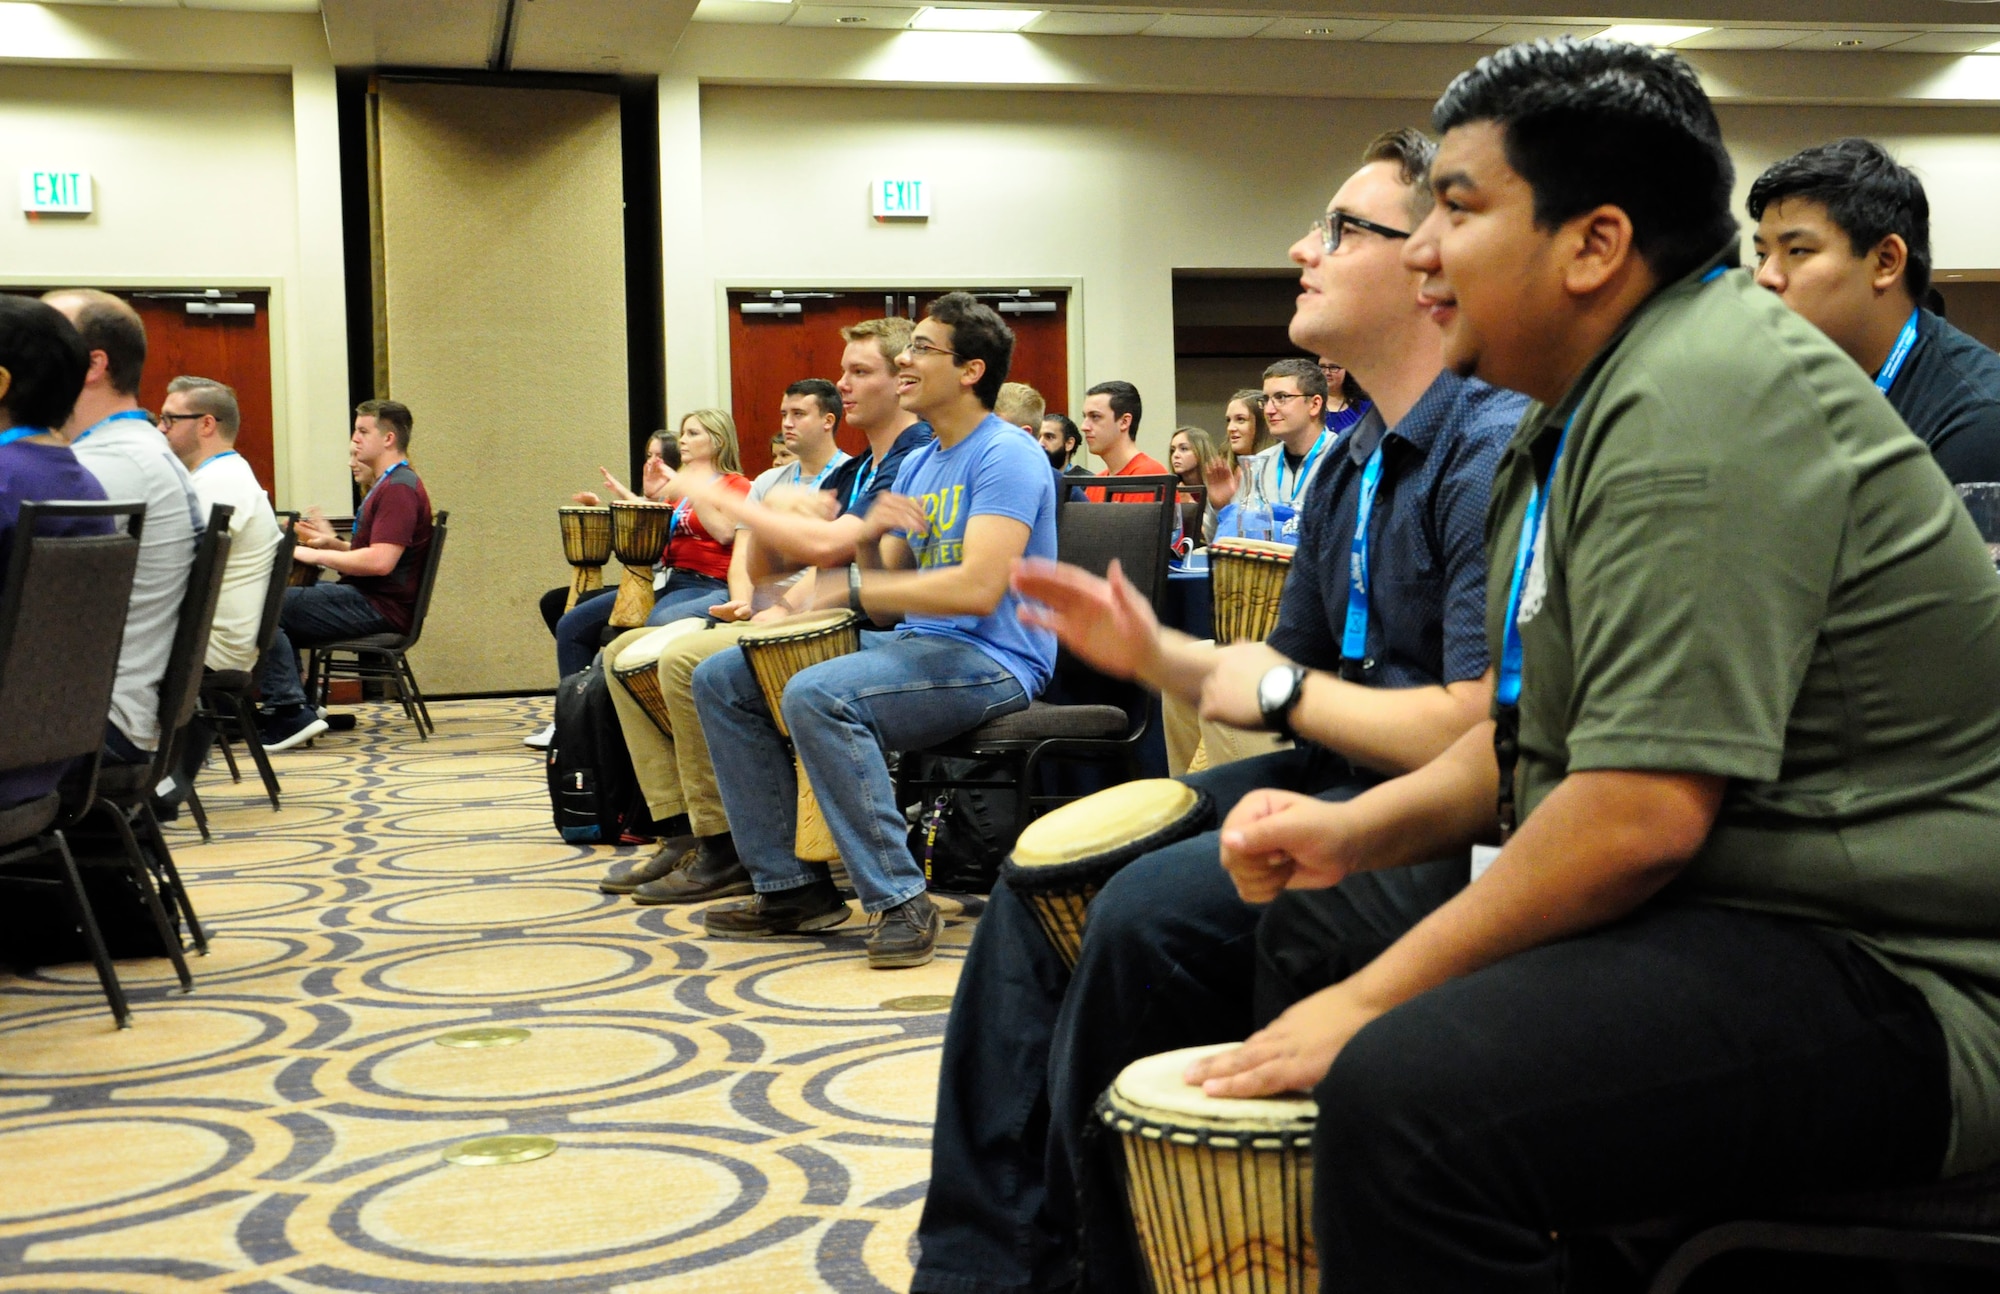 College students in the Air Force’s Premier College Intern Program begin a three-day symposium with the Drum Café, an organization that uses interactive drumming exercises to encourage teamwork and diversity in the workplace. The symposium was hosted by the Air Force Personnel Center at the Holiday Inn in Fairborn, Ohio, June 25-27. (U.S. Air Force photo/Karina Brady)